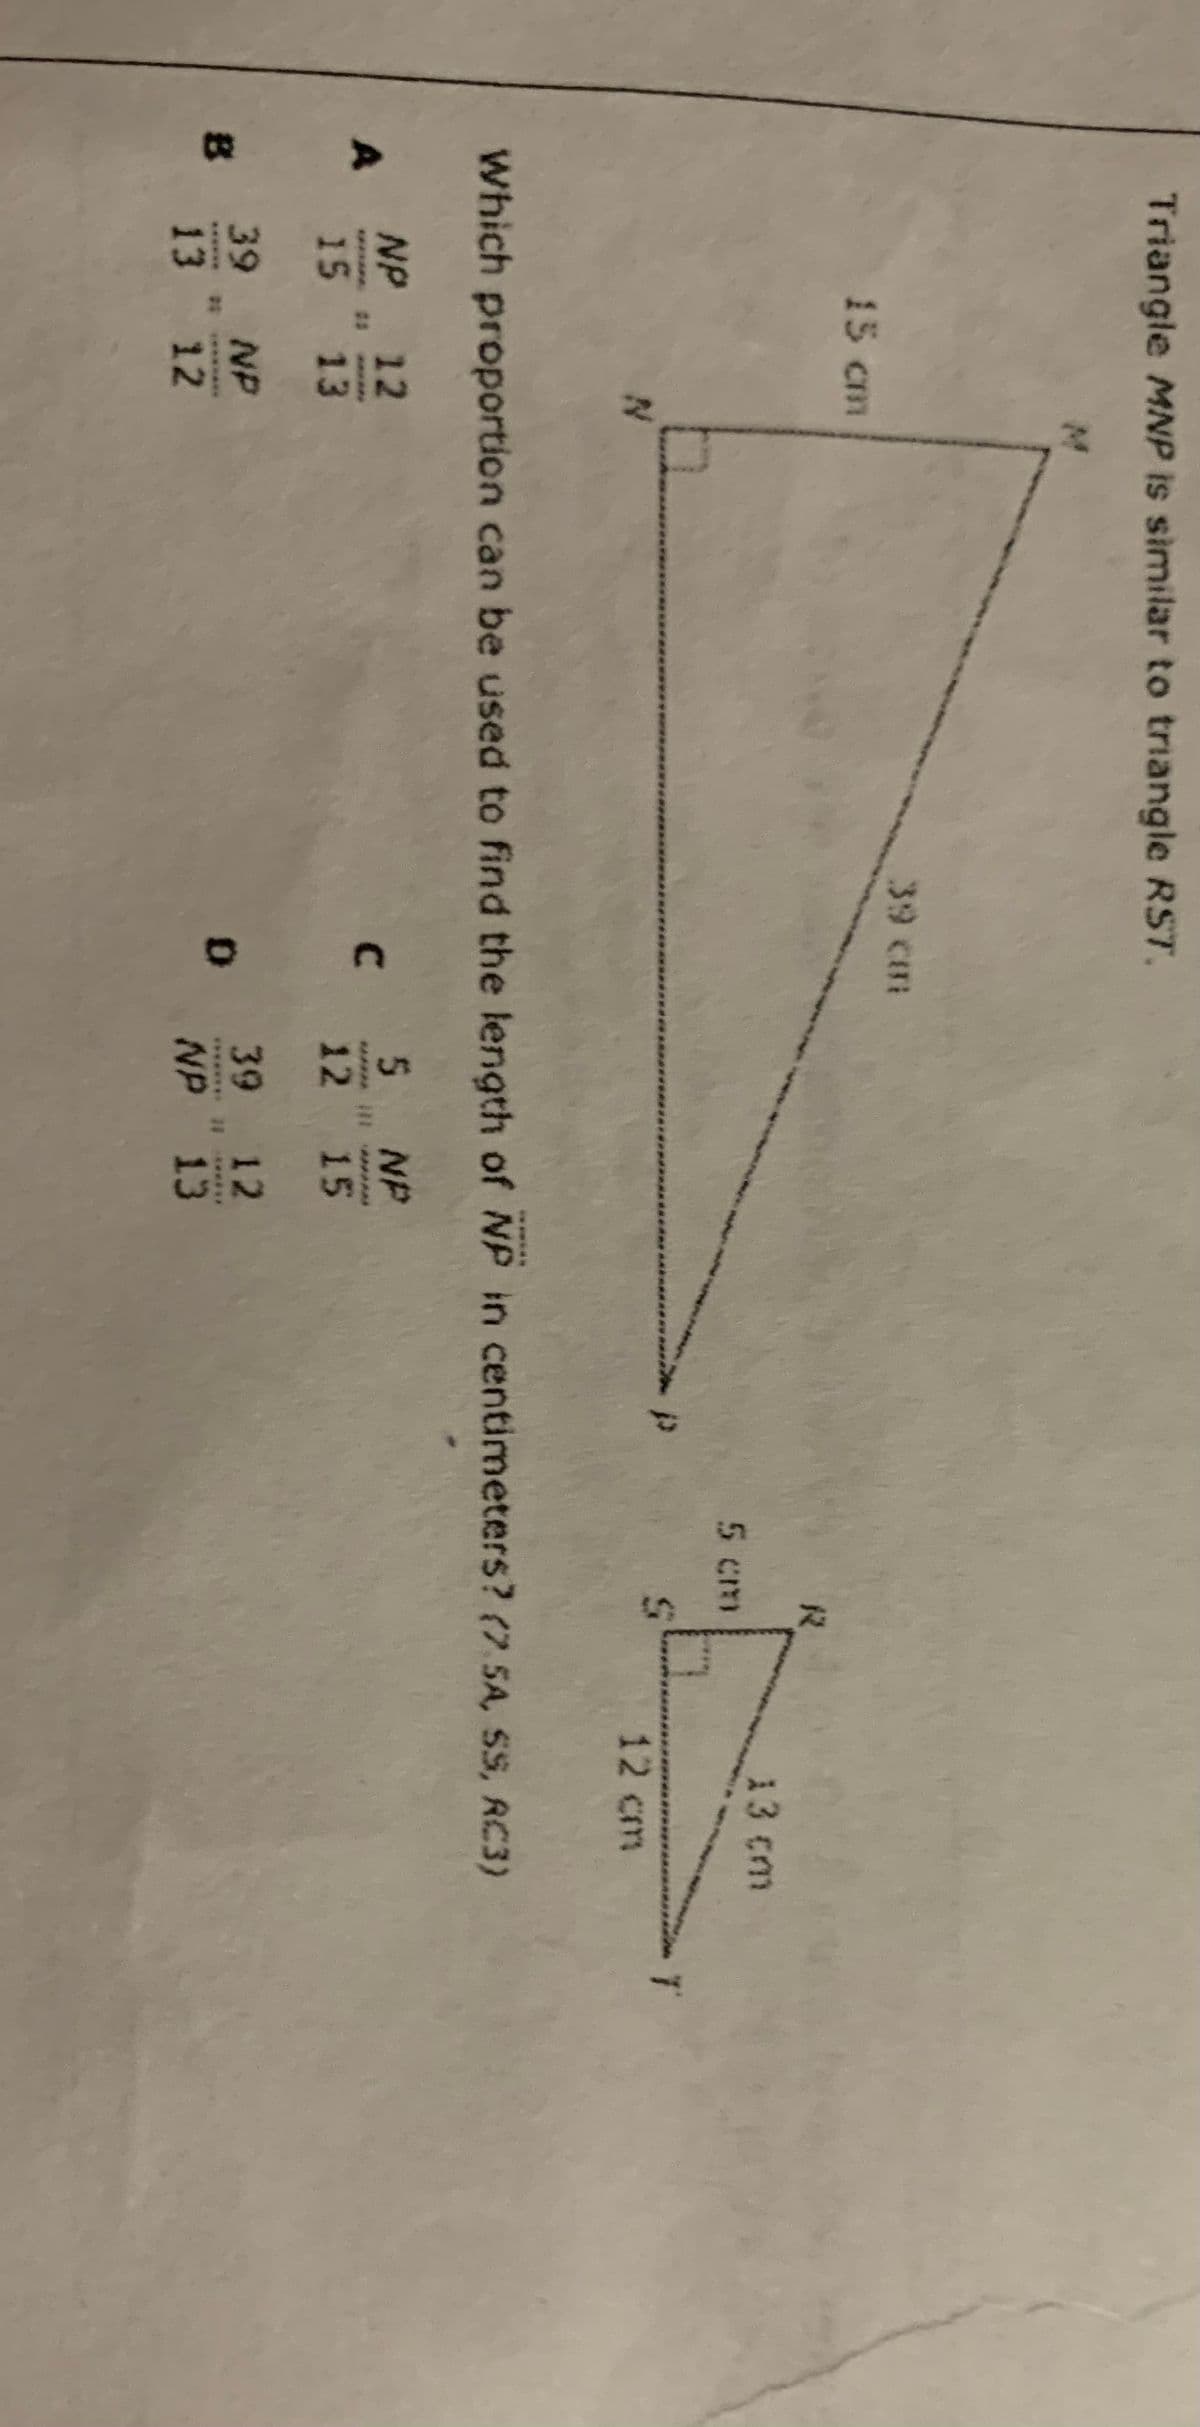 Triangle MNP is similar to triangle RST.
39 cm
15 cm
13 cm
5 cm
12 cm
Which proportion can be used to find the length of NP in centimeters? (7. 5A, SS, RC3)
NP 12
5 NP
C.
15 13
12 15
39 12
39 NP
B
13 12
NP 13
